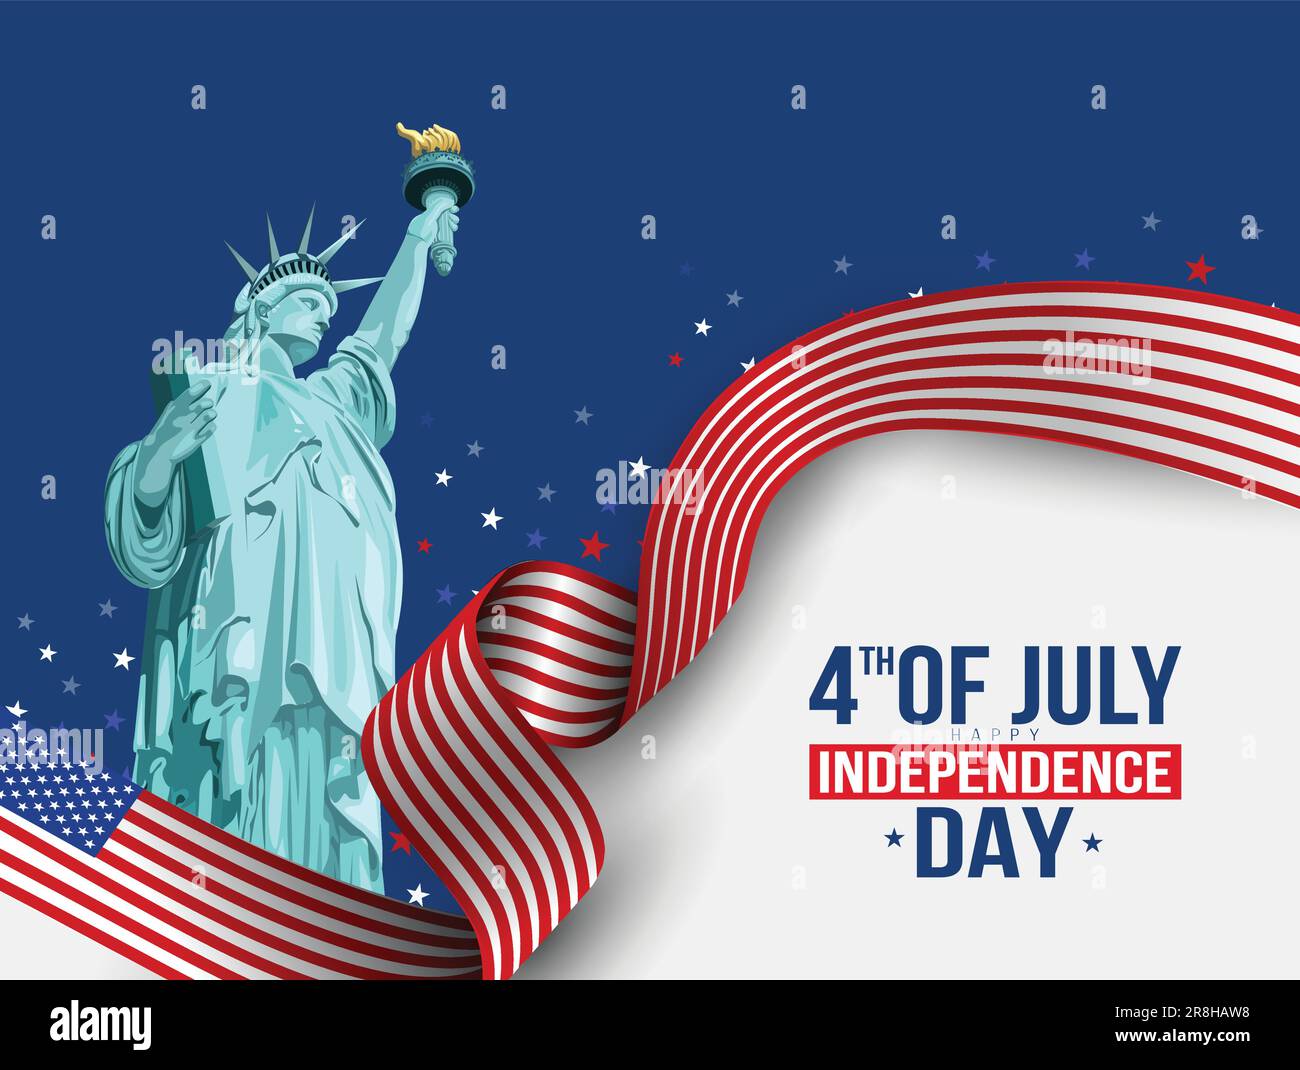 American national flag with Statue of Liberty for 4th of July, happy Independence Day celebration. Stock Vector